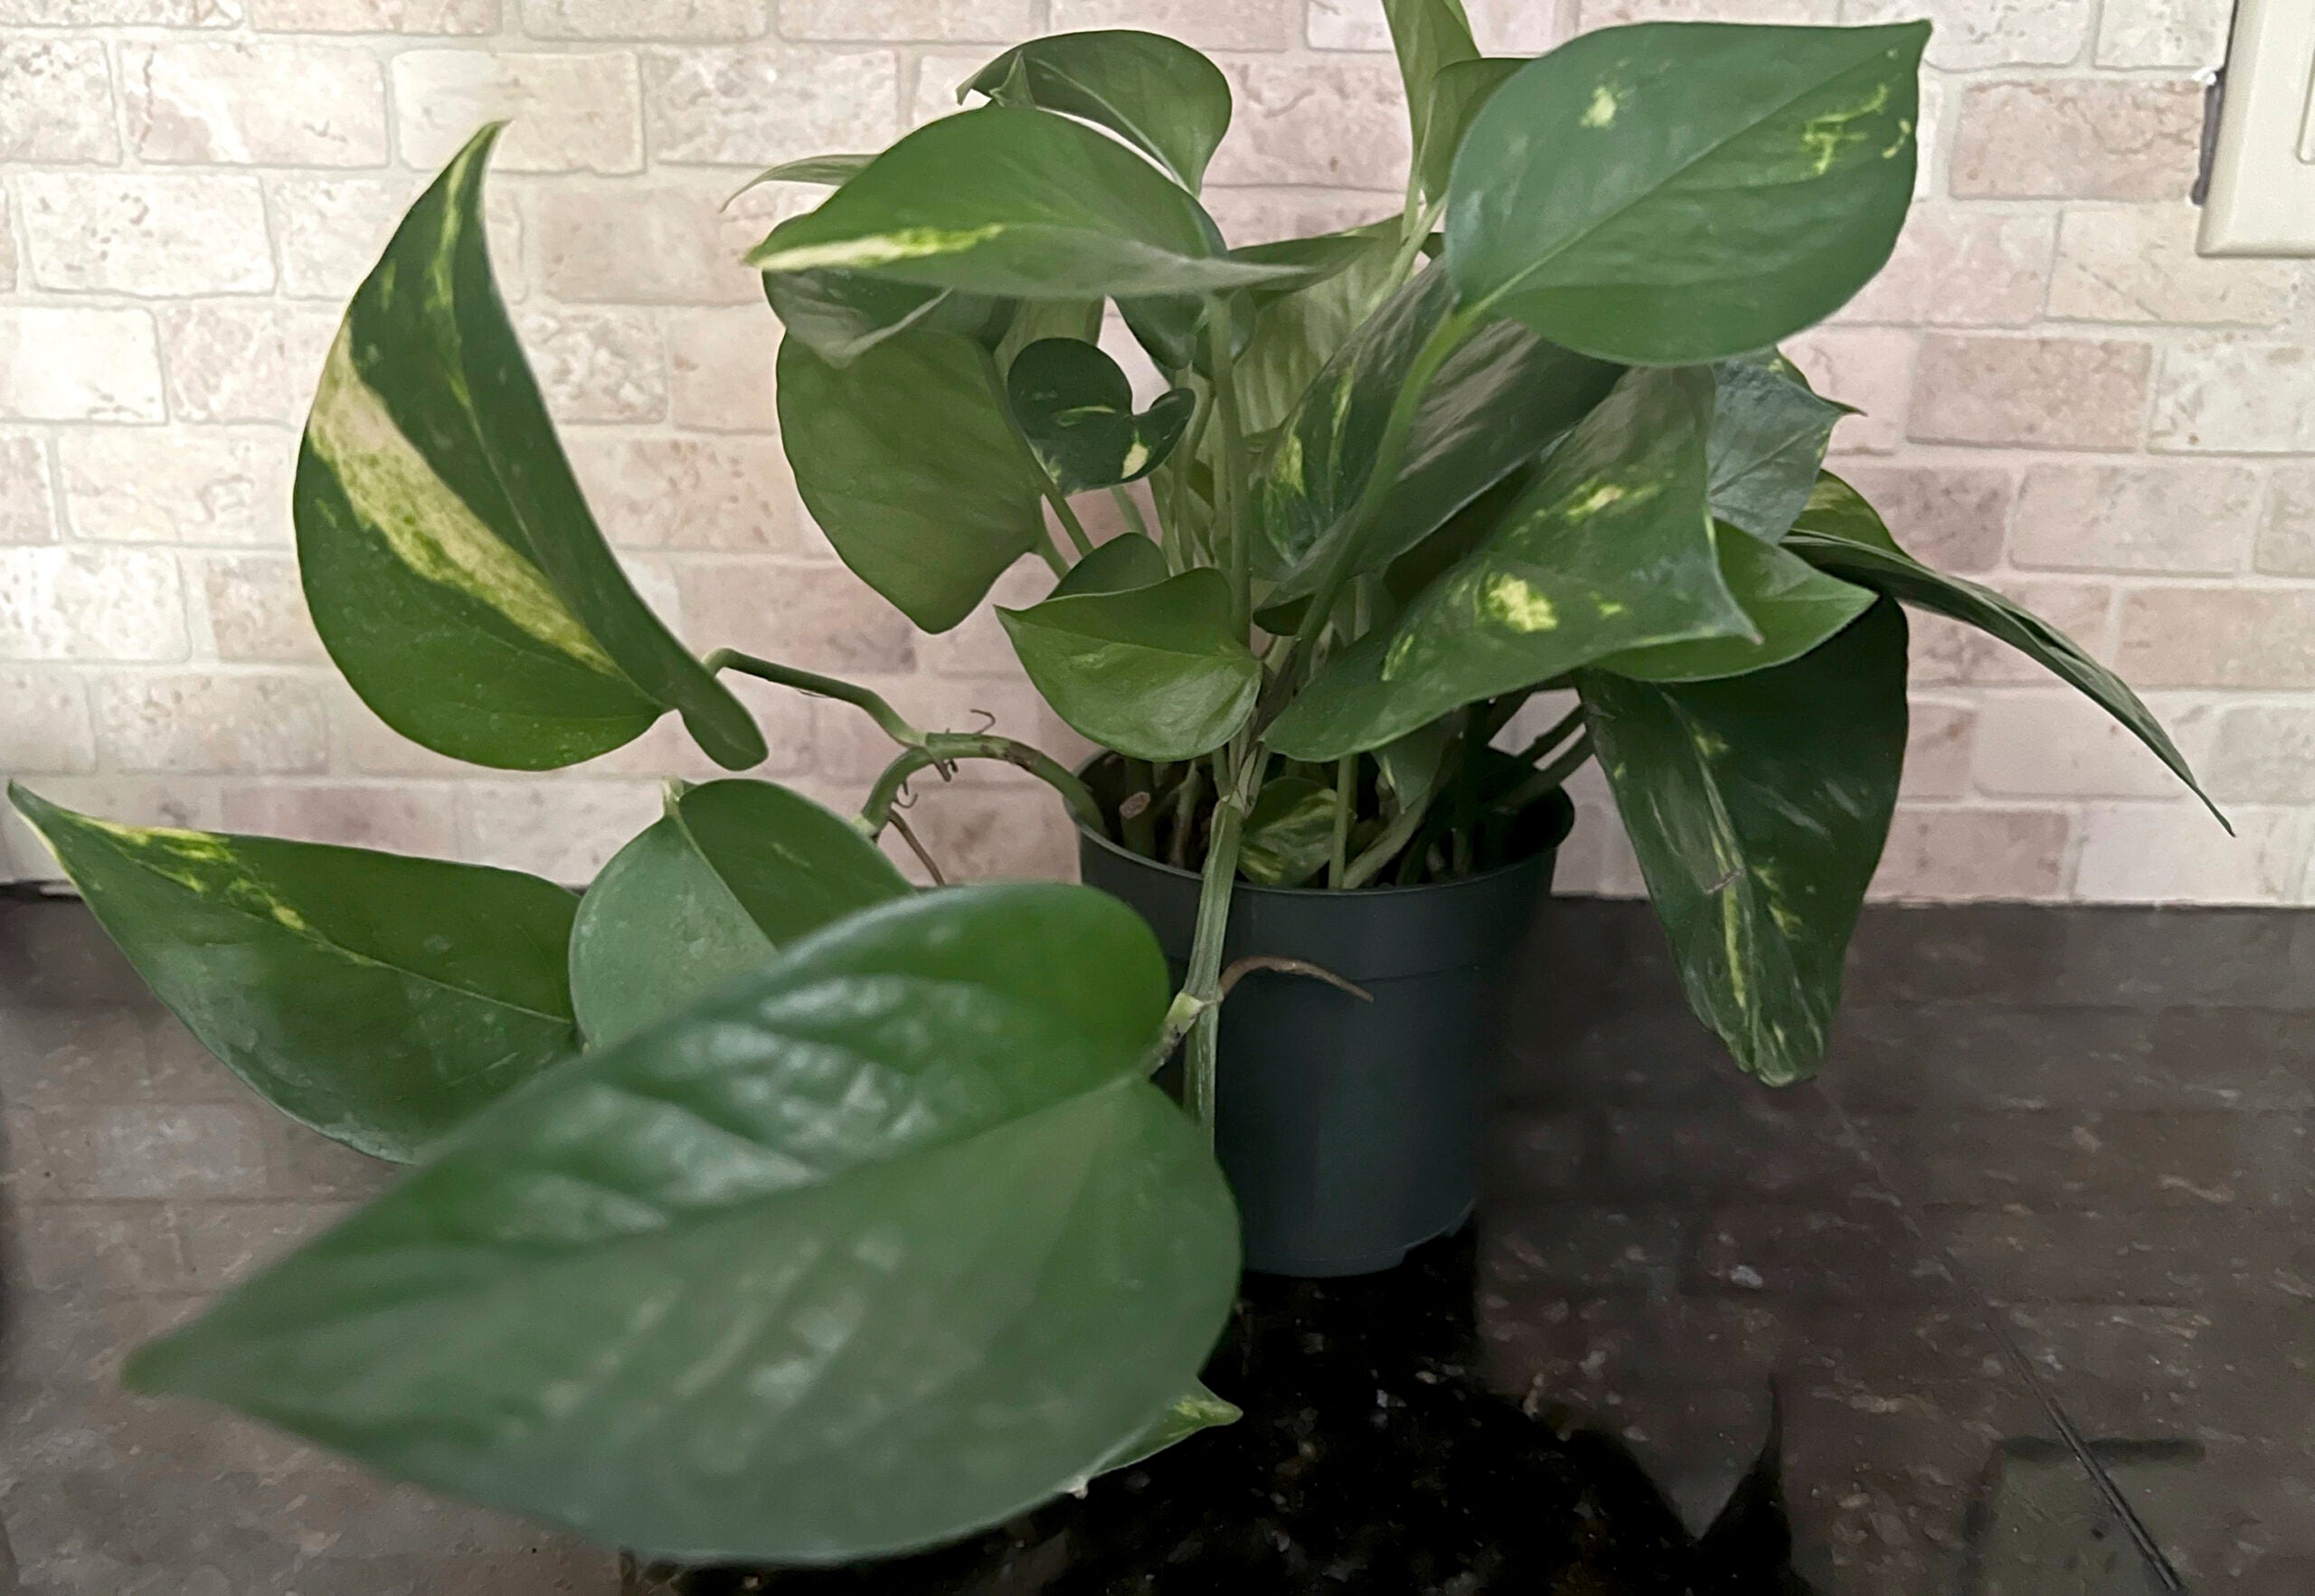 This Jan. 17, 2023, image provided by Jessica Damiano shows a vining pothos houseplant, which has toxic properties so should be kept away from children. (Jessica Damiano via AP) used to illustrate a story on indoor plants.